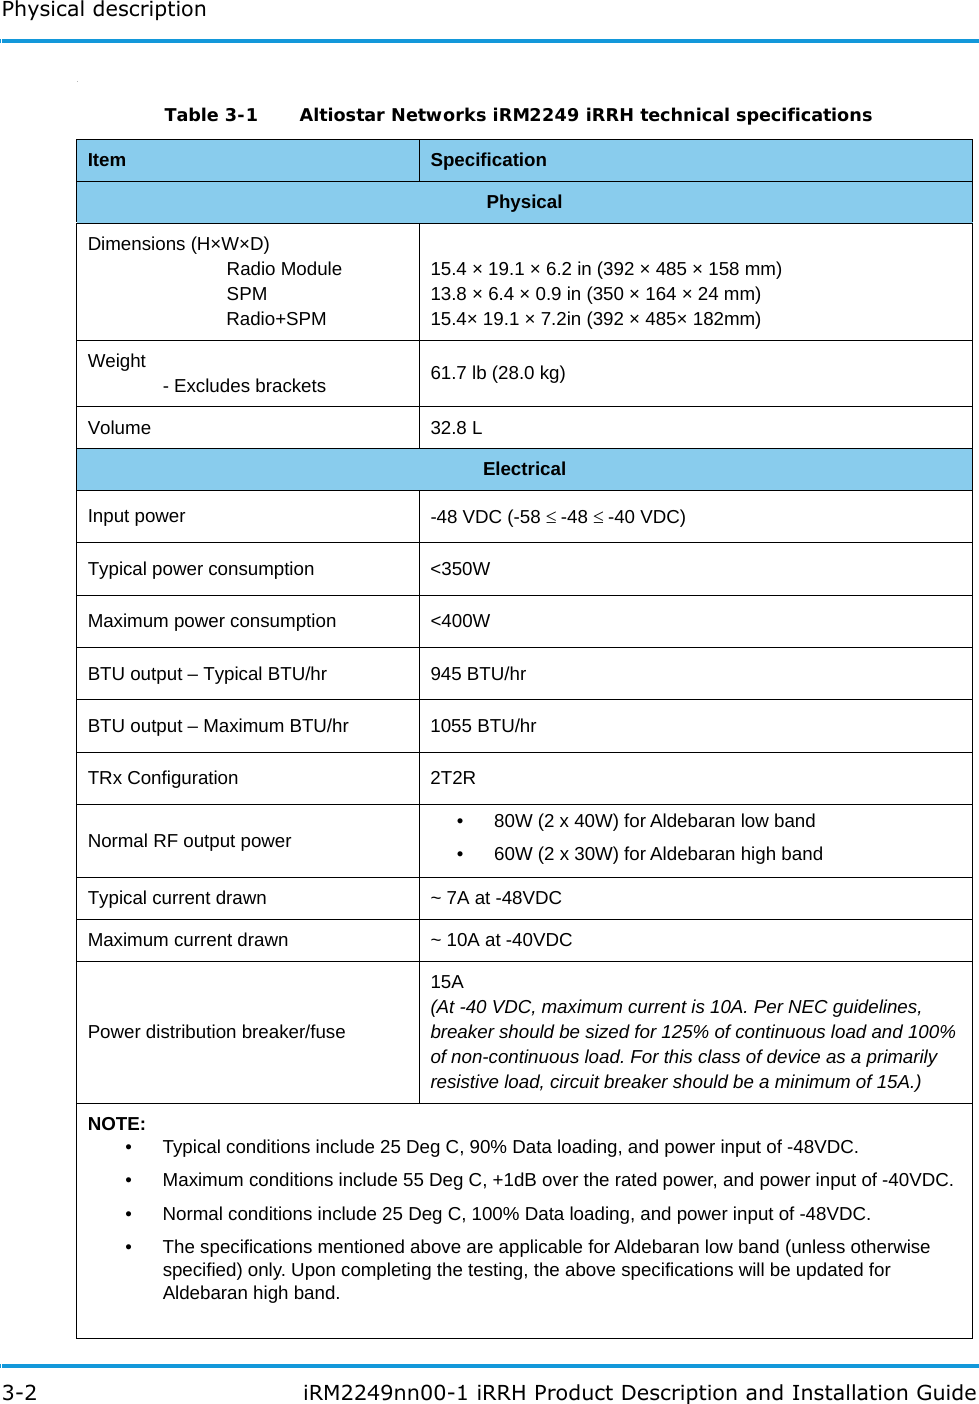 Physical description3-2  iRM2249nn00-1 iRRH Product Description and Installation Guide.Table 3-1   Altiostar Networks iRM2249 iRRH technical specifications  Item SpecificationPhysicalDimensions (H×W×D) Radio ModuleSPM            Radio+SPM15.4 × 19.1 × 6.2 in (392 × 485 × 158 mm)13.8 × 6.4 × 0.9 in (350 × 164 × 24 mm)15.4× 19.1 × 7.2in (392 × 485× 182mm)Weight- Excludes brackets 61.7 lb (28.0 kg)Volume 32.8 LElectricalInput power -48 VDC (-58 -48 -40 VDC) Typical power consumption &lt;350WMaximum power consumption &lt;400WBTU output – Typical BTU/hr 945 BTU/hrBTU output – Maximum BTU/hr 1055 BTU/hrTRx Configuration 2T2RNormal RF output power • 80W (2 x 40W) for Aldebaran low band• 60W (2 x 30W) for Aldebaran high bandTypical current drawn ~ 7A at -48VDCMaximum current drawn ~ 10A at -40VDCPower distribution breaker/fuse15A (At -40 VDC, maximum current is 10A. Per NEC guidelines, breaker should be sized for 125% of continuous load and 100% of non-continuous load. For this class of device as a primarily resistive load, circuit breaker should be a minimum of 15A.)NOTE:• Typical conditions include 25 Deg C, 90% Data loading, and power input of -48VDC.• Maximum conditions include 55 Deg C, +1dB over the rated power, and power input of -40VDC.• Normal conditions include 25 Deg C, 100% Data loading, and power input of -48VDC.• The specifications mentioned above are applicable for Aldebaran low band (unless otherwise specified) only. Upon completing the testing, the above specifications will be updated for Aldebaran high band.